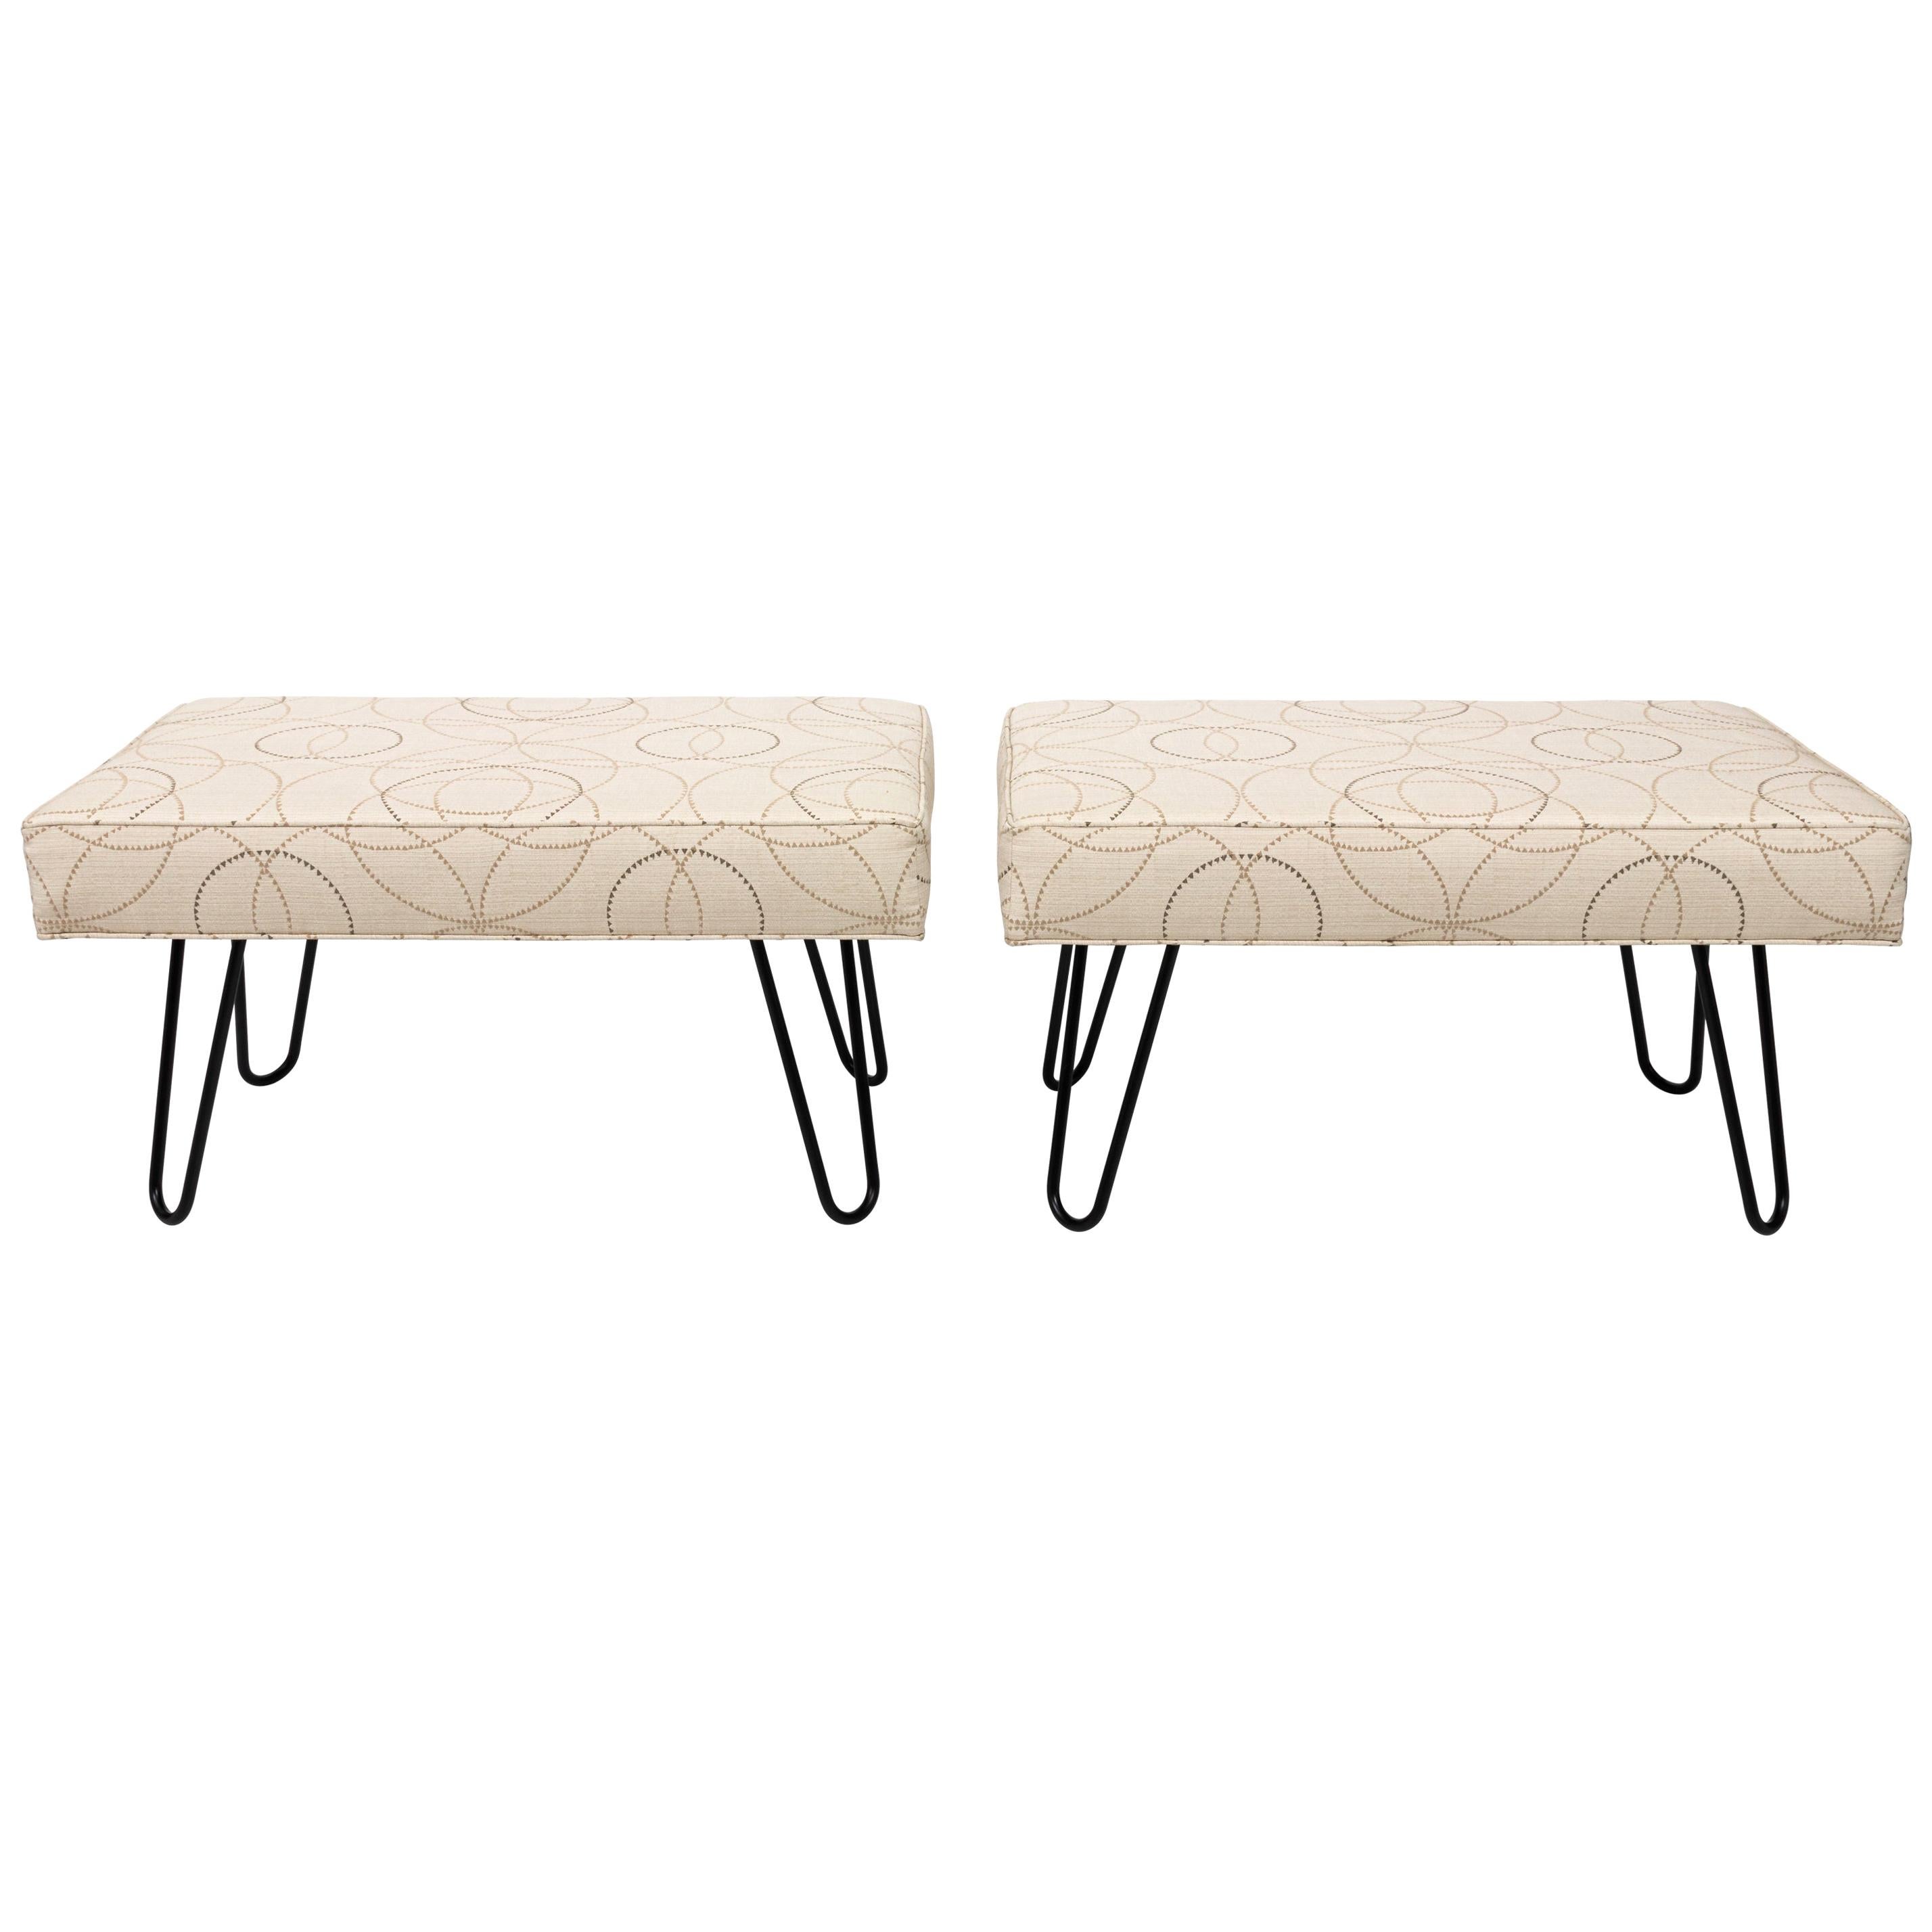 Pair of custom hairpin leg benches, with satin black powder coated iron legs and four inch thick upholstered seats. Shown with 24